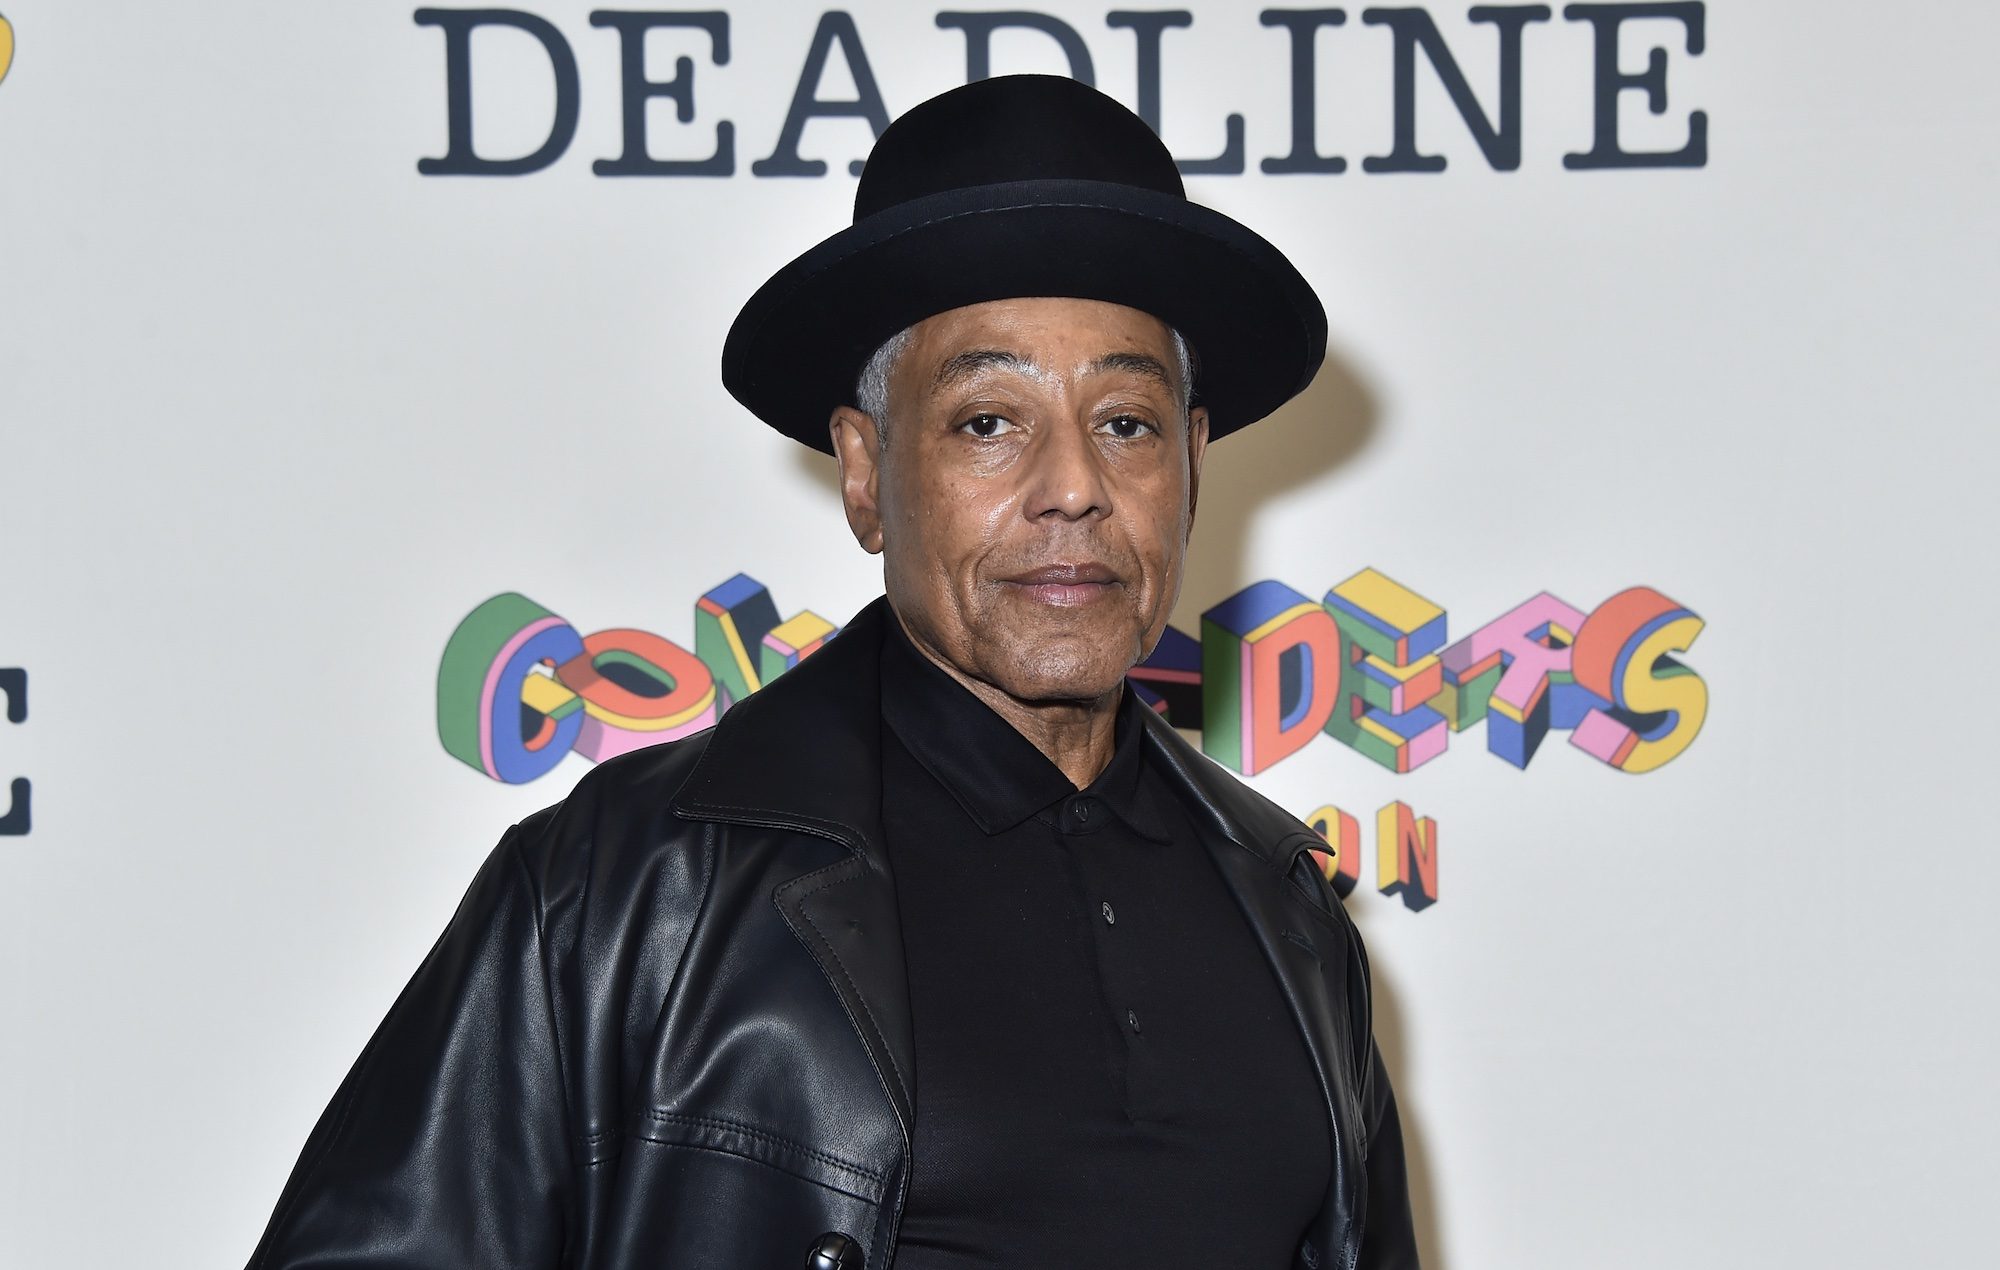 ‘Breaking Bad’ star Giancarlo Esposito once considered planning his own murder so his kids could inherit the insurance money